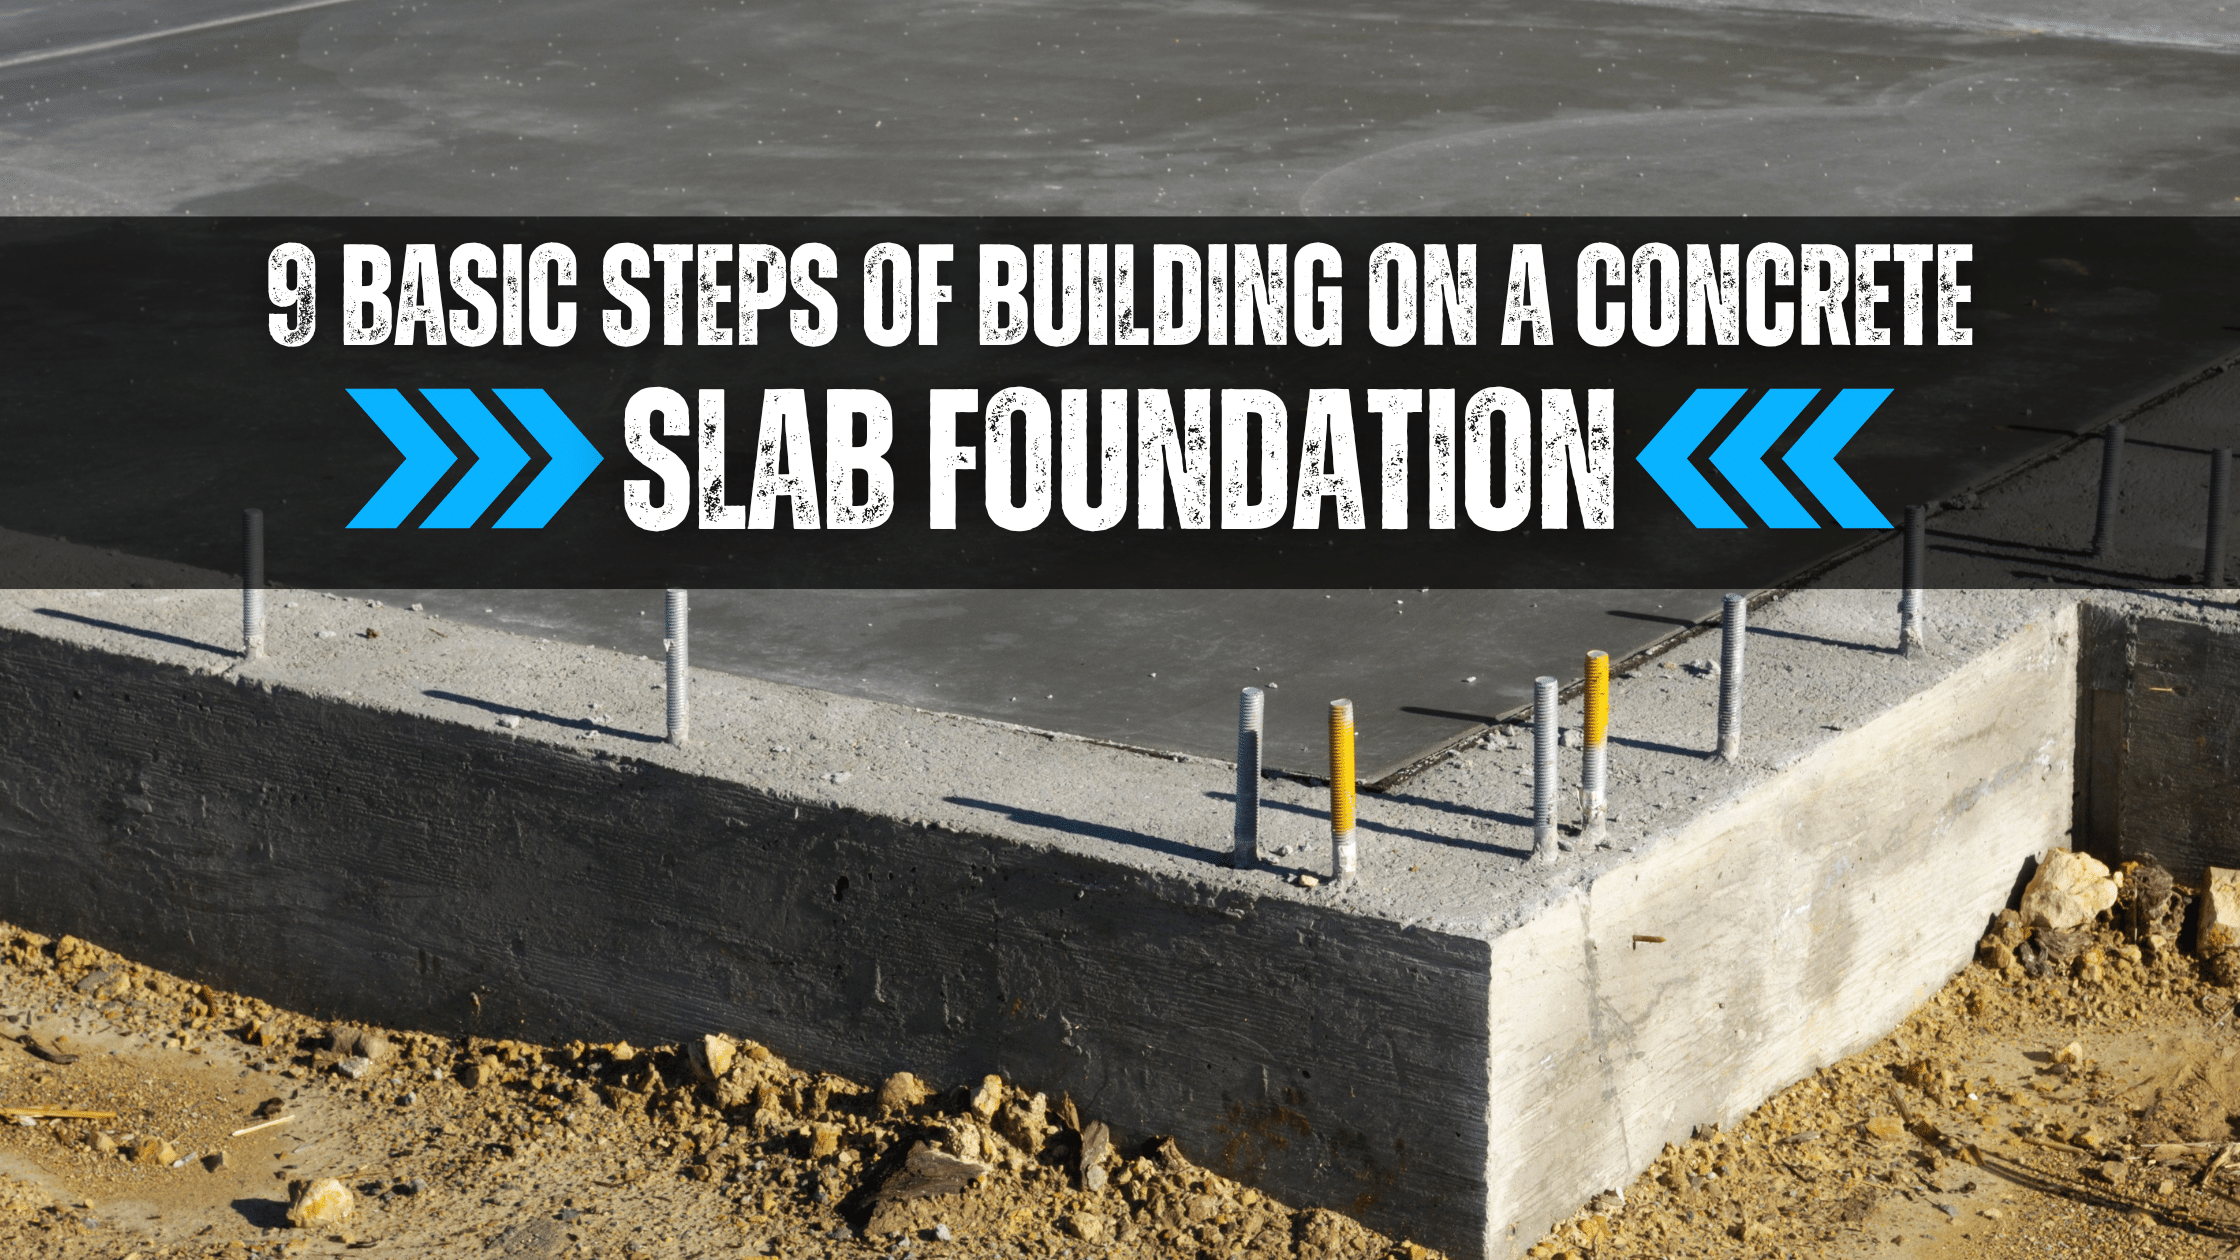 9 Basic Steps You Have to Take Before Building on a Concrete Slab Foundation